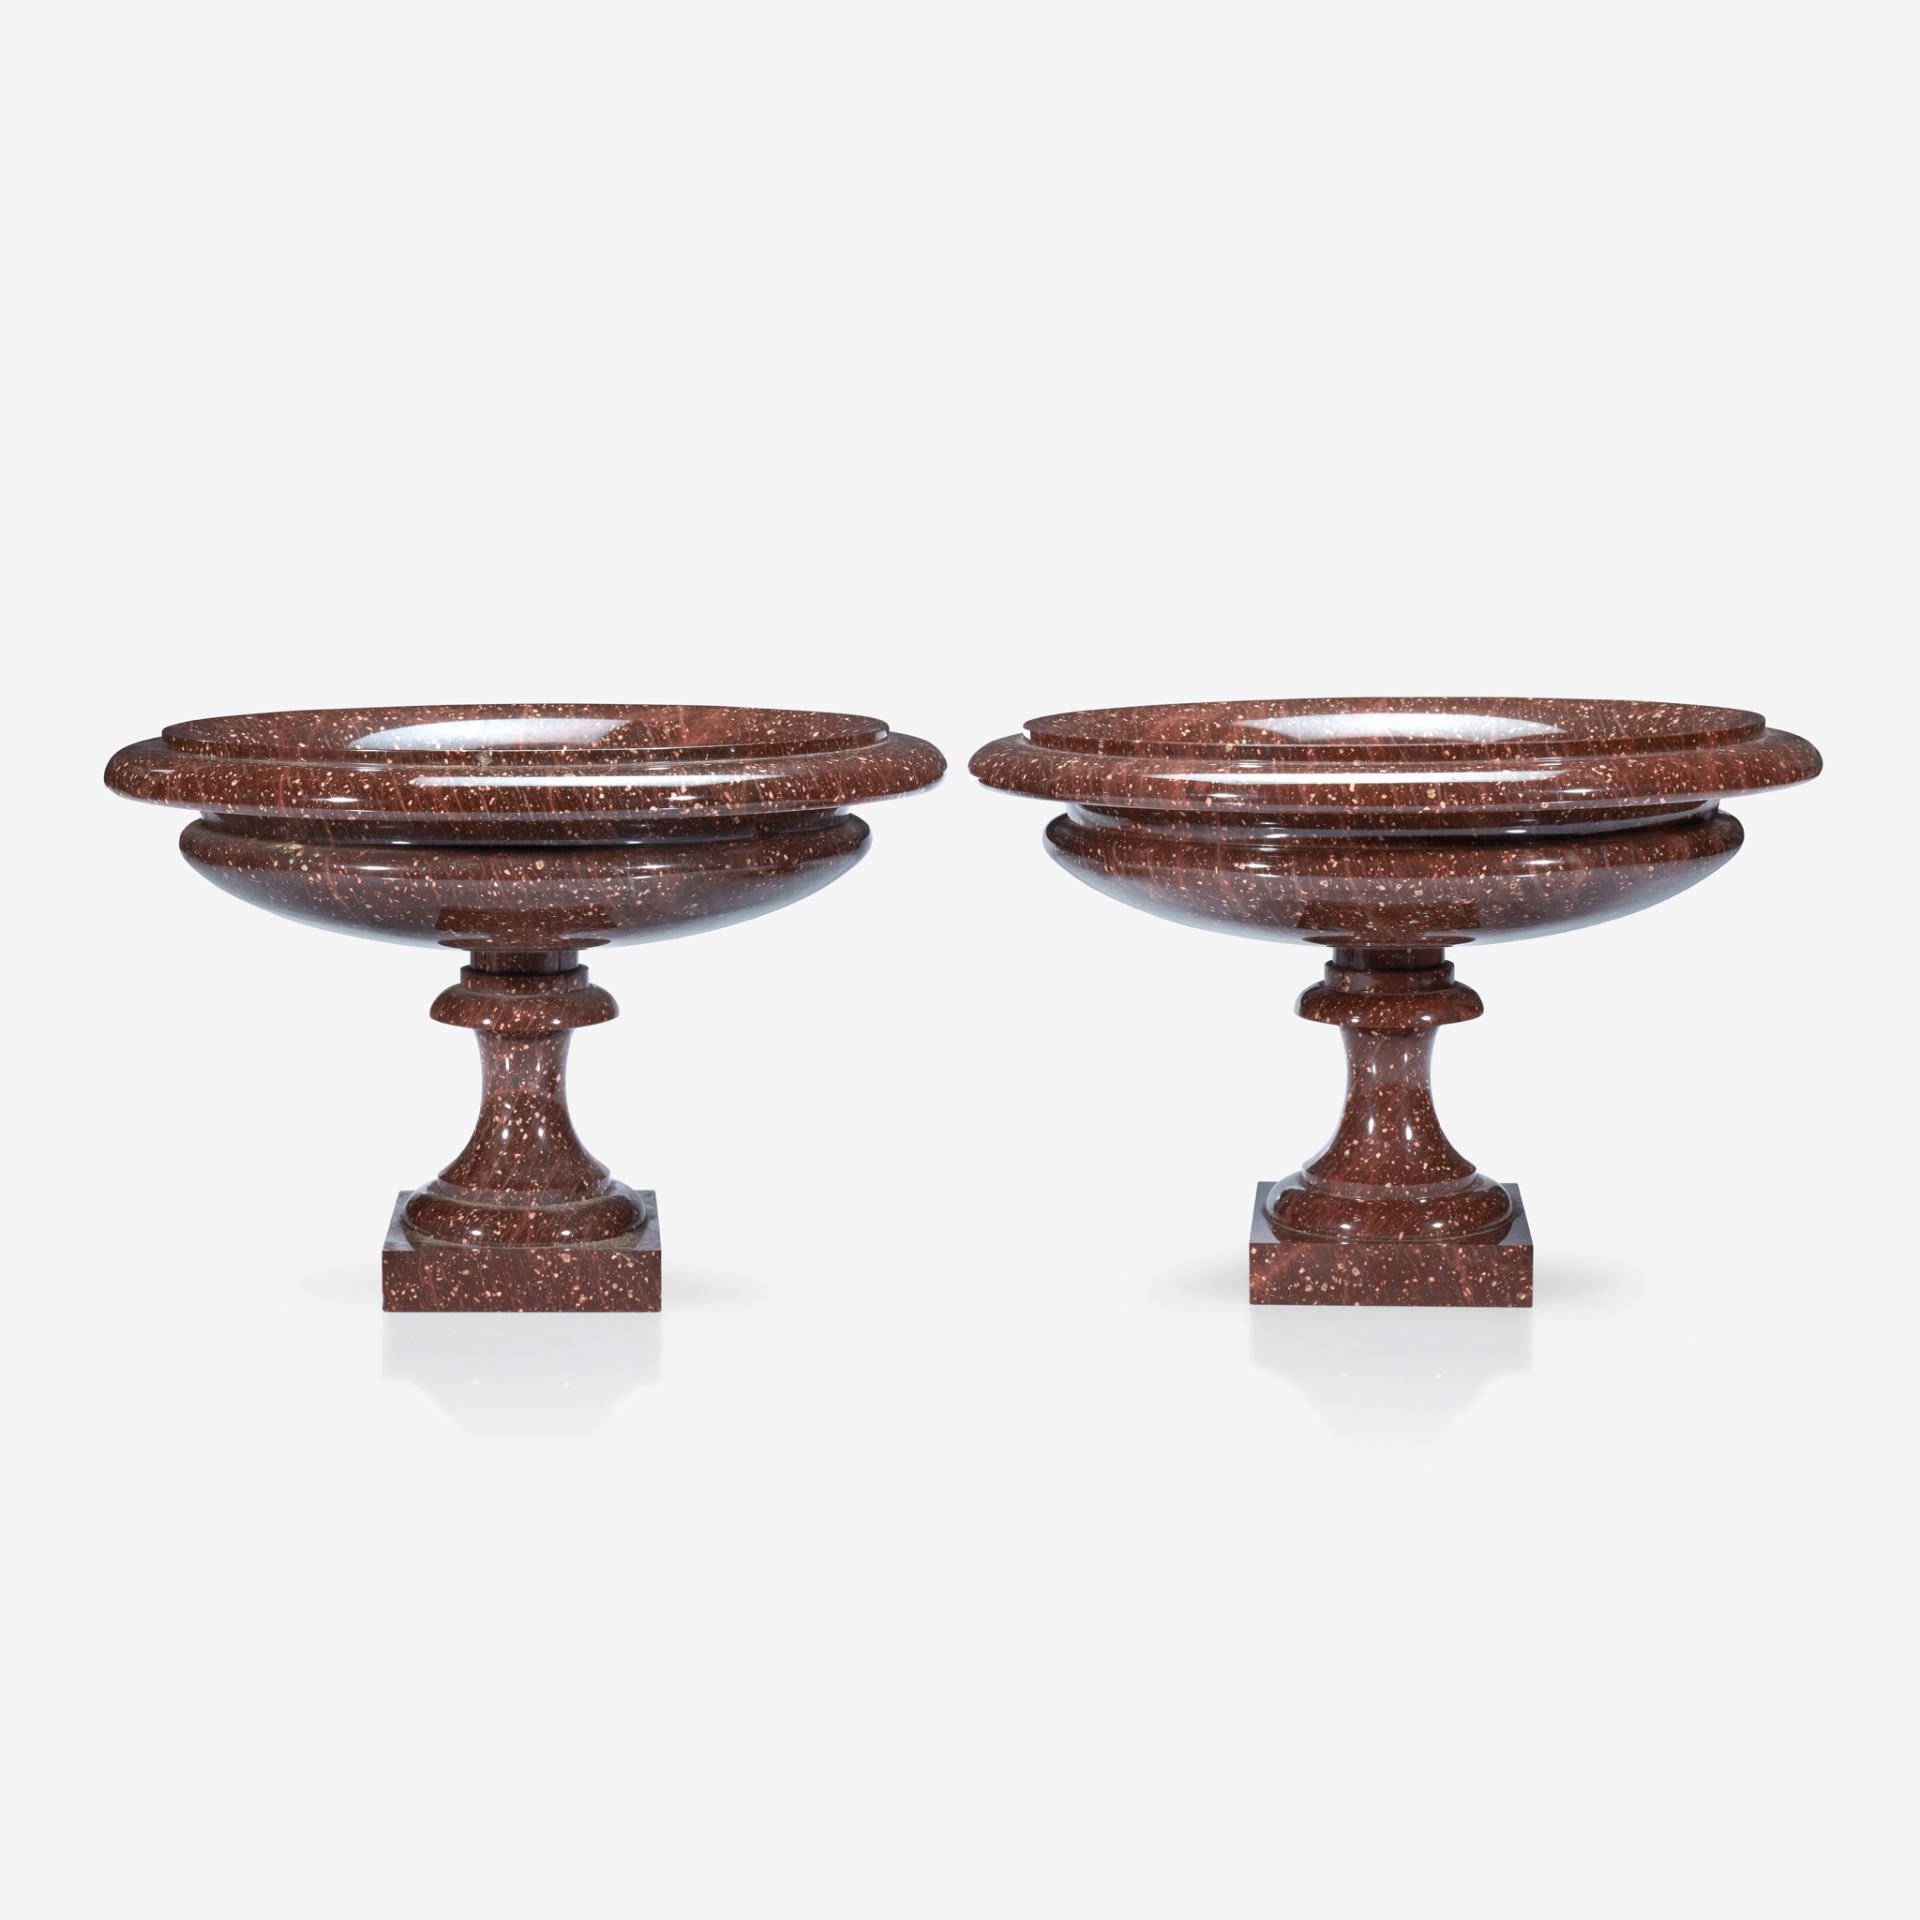 A fine pair of Continental porphyry tazza, 19th century